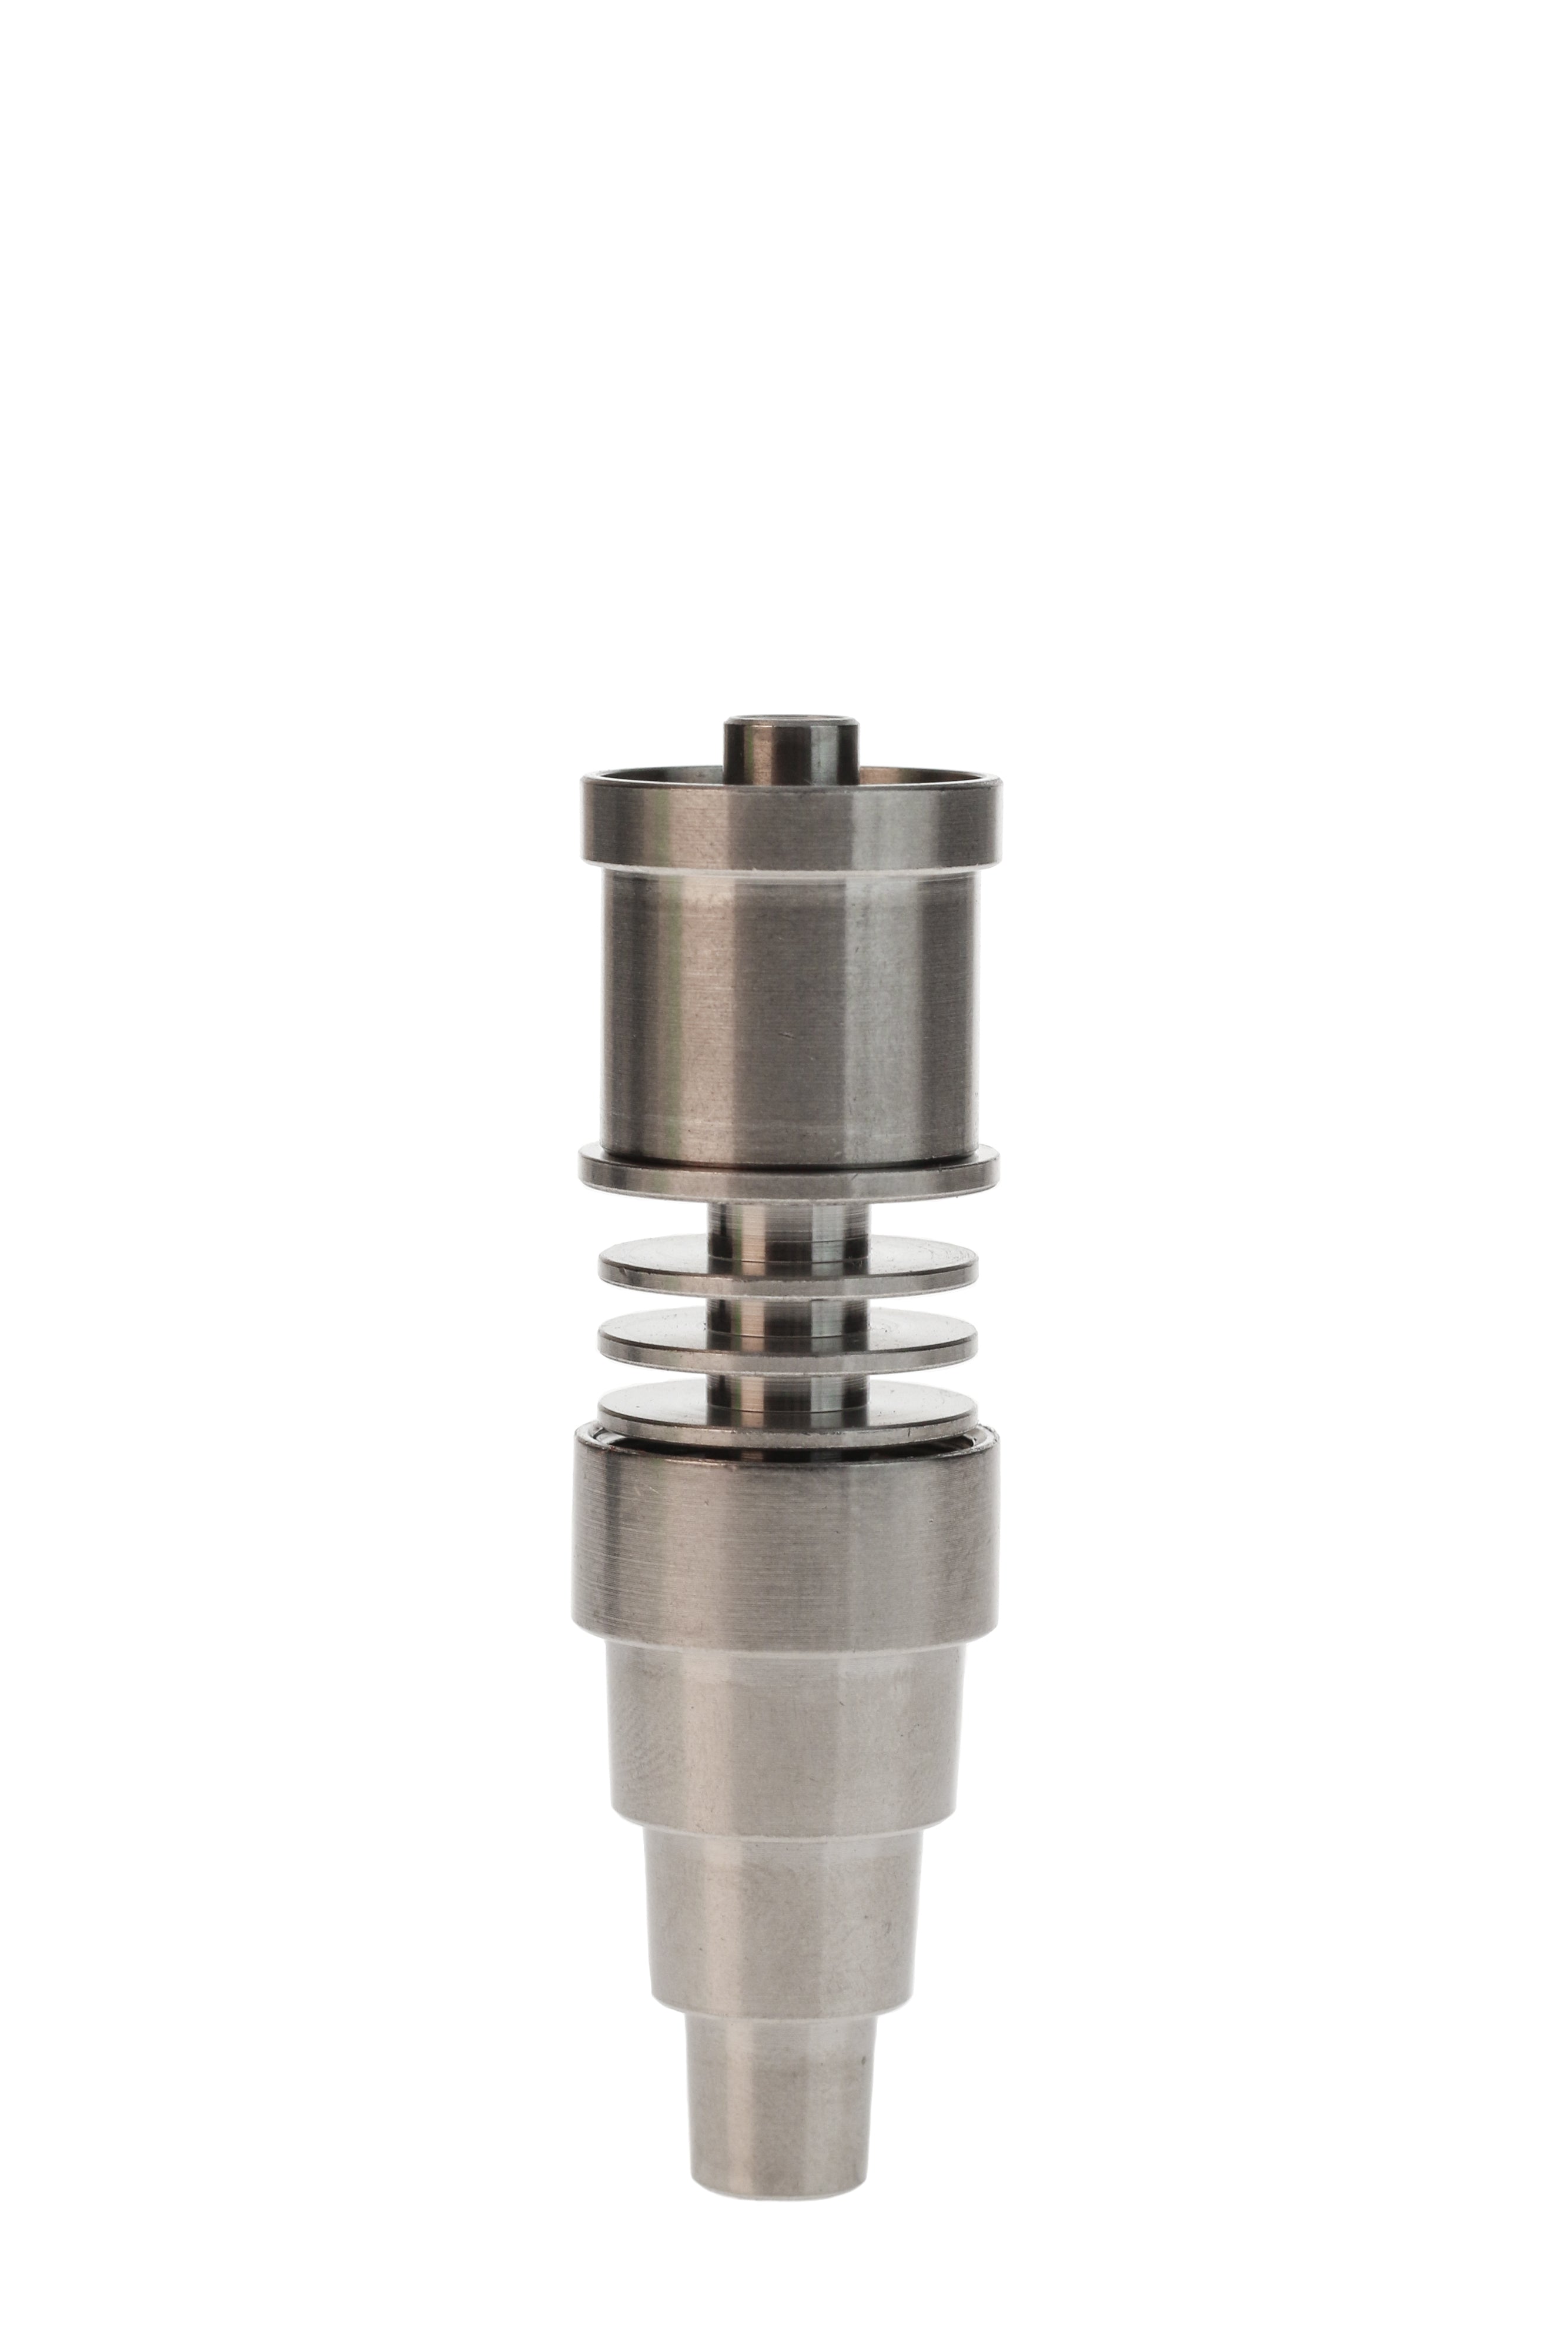 Titanium Domeless Nail - NAIL10 - Dab Rig Accessories & Mods - Oil Bubblers  & Dab Rigs - Smoking Pipes & Waterpipes